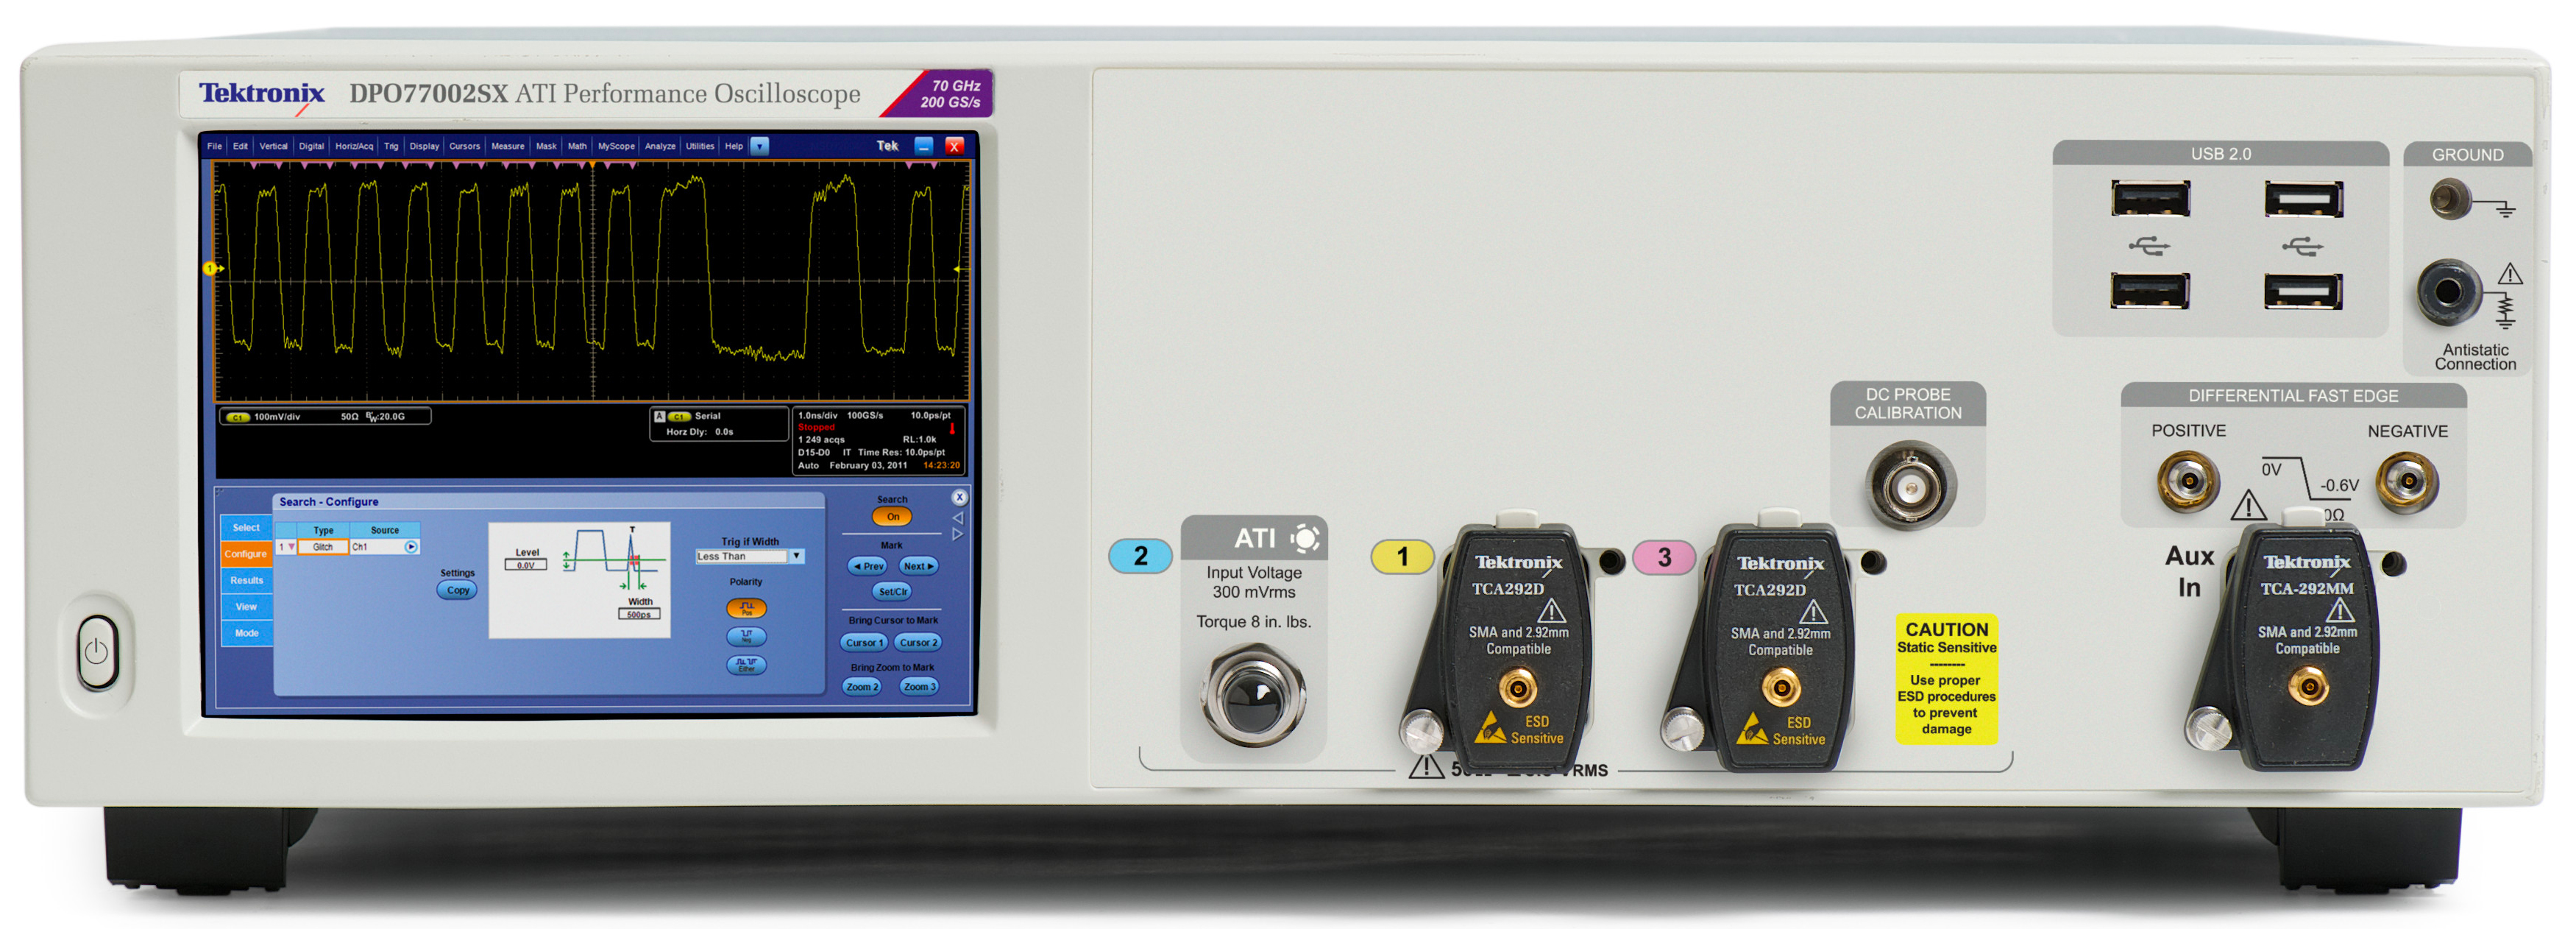 Expanded Oscilloscopes Series Includes 13 and 16 GHz Models